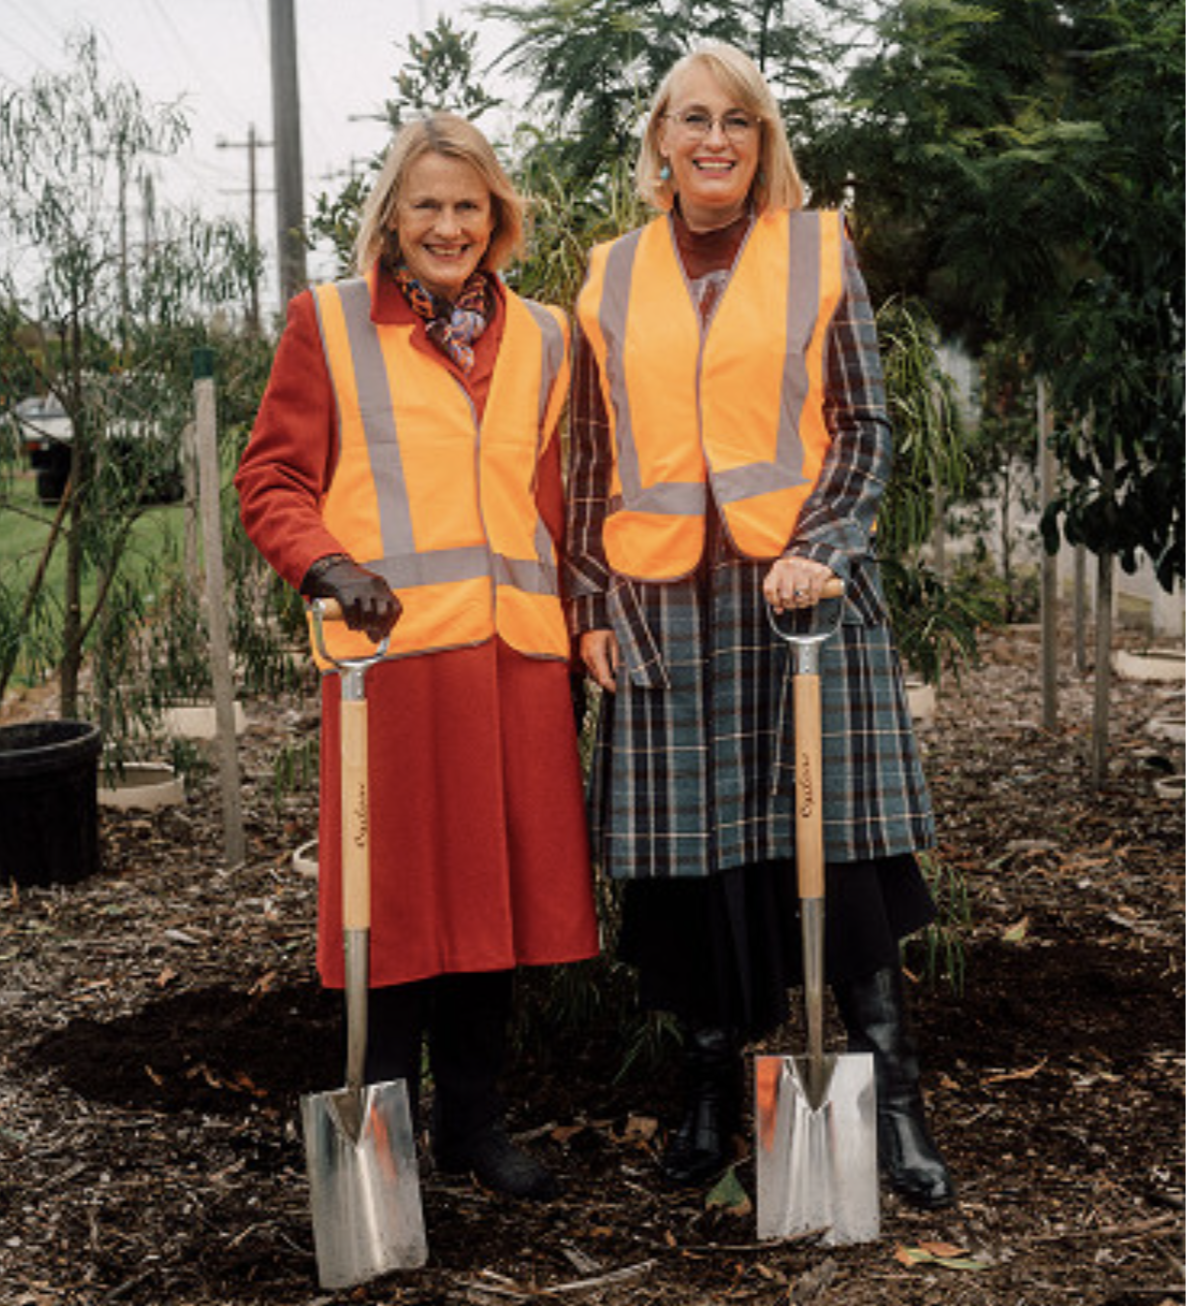 Meredith Sussex – Chair of Fishermans Bend Development Board and Lord Mayor Sally Capp break ground to plant trees along Turner Street holding shovels and wearing hi-vis vests